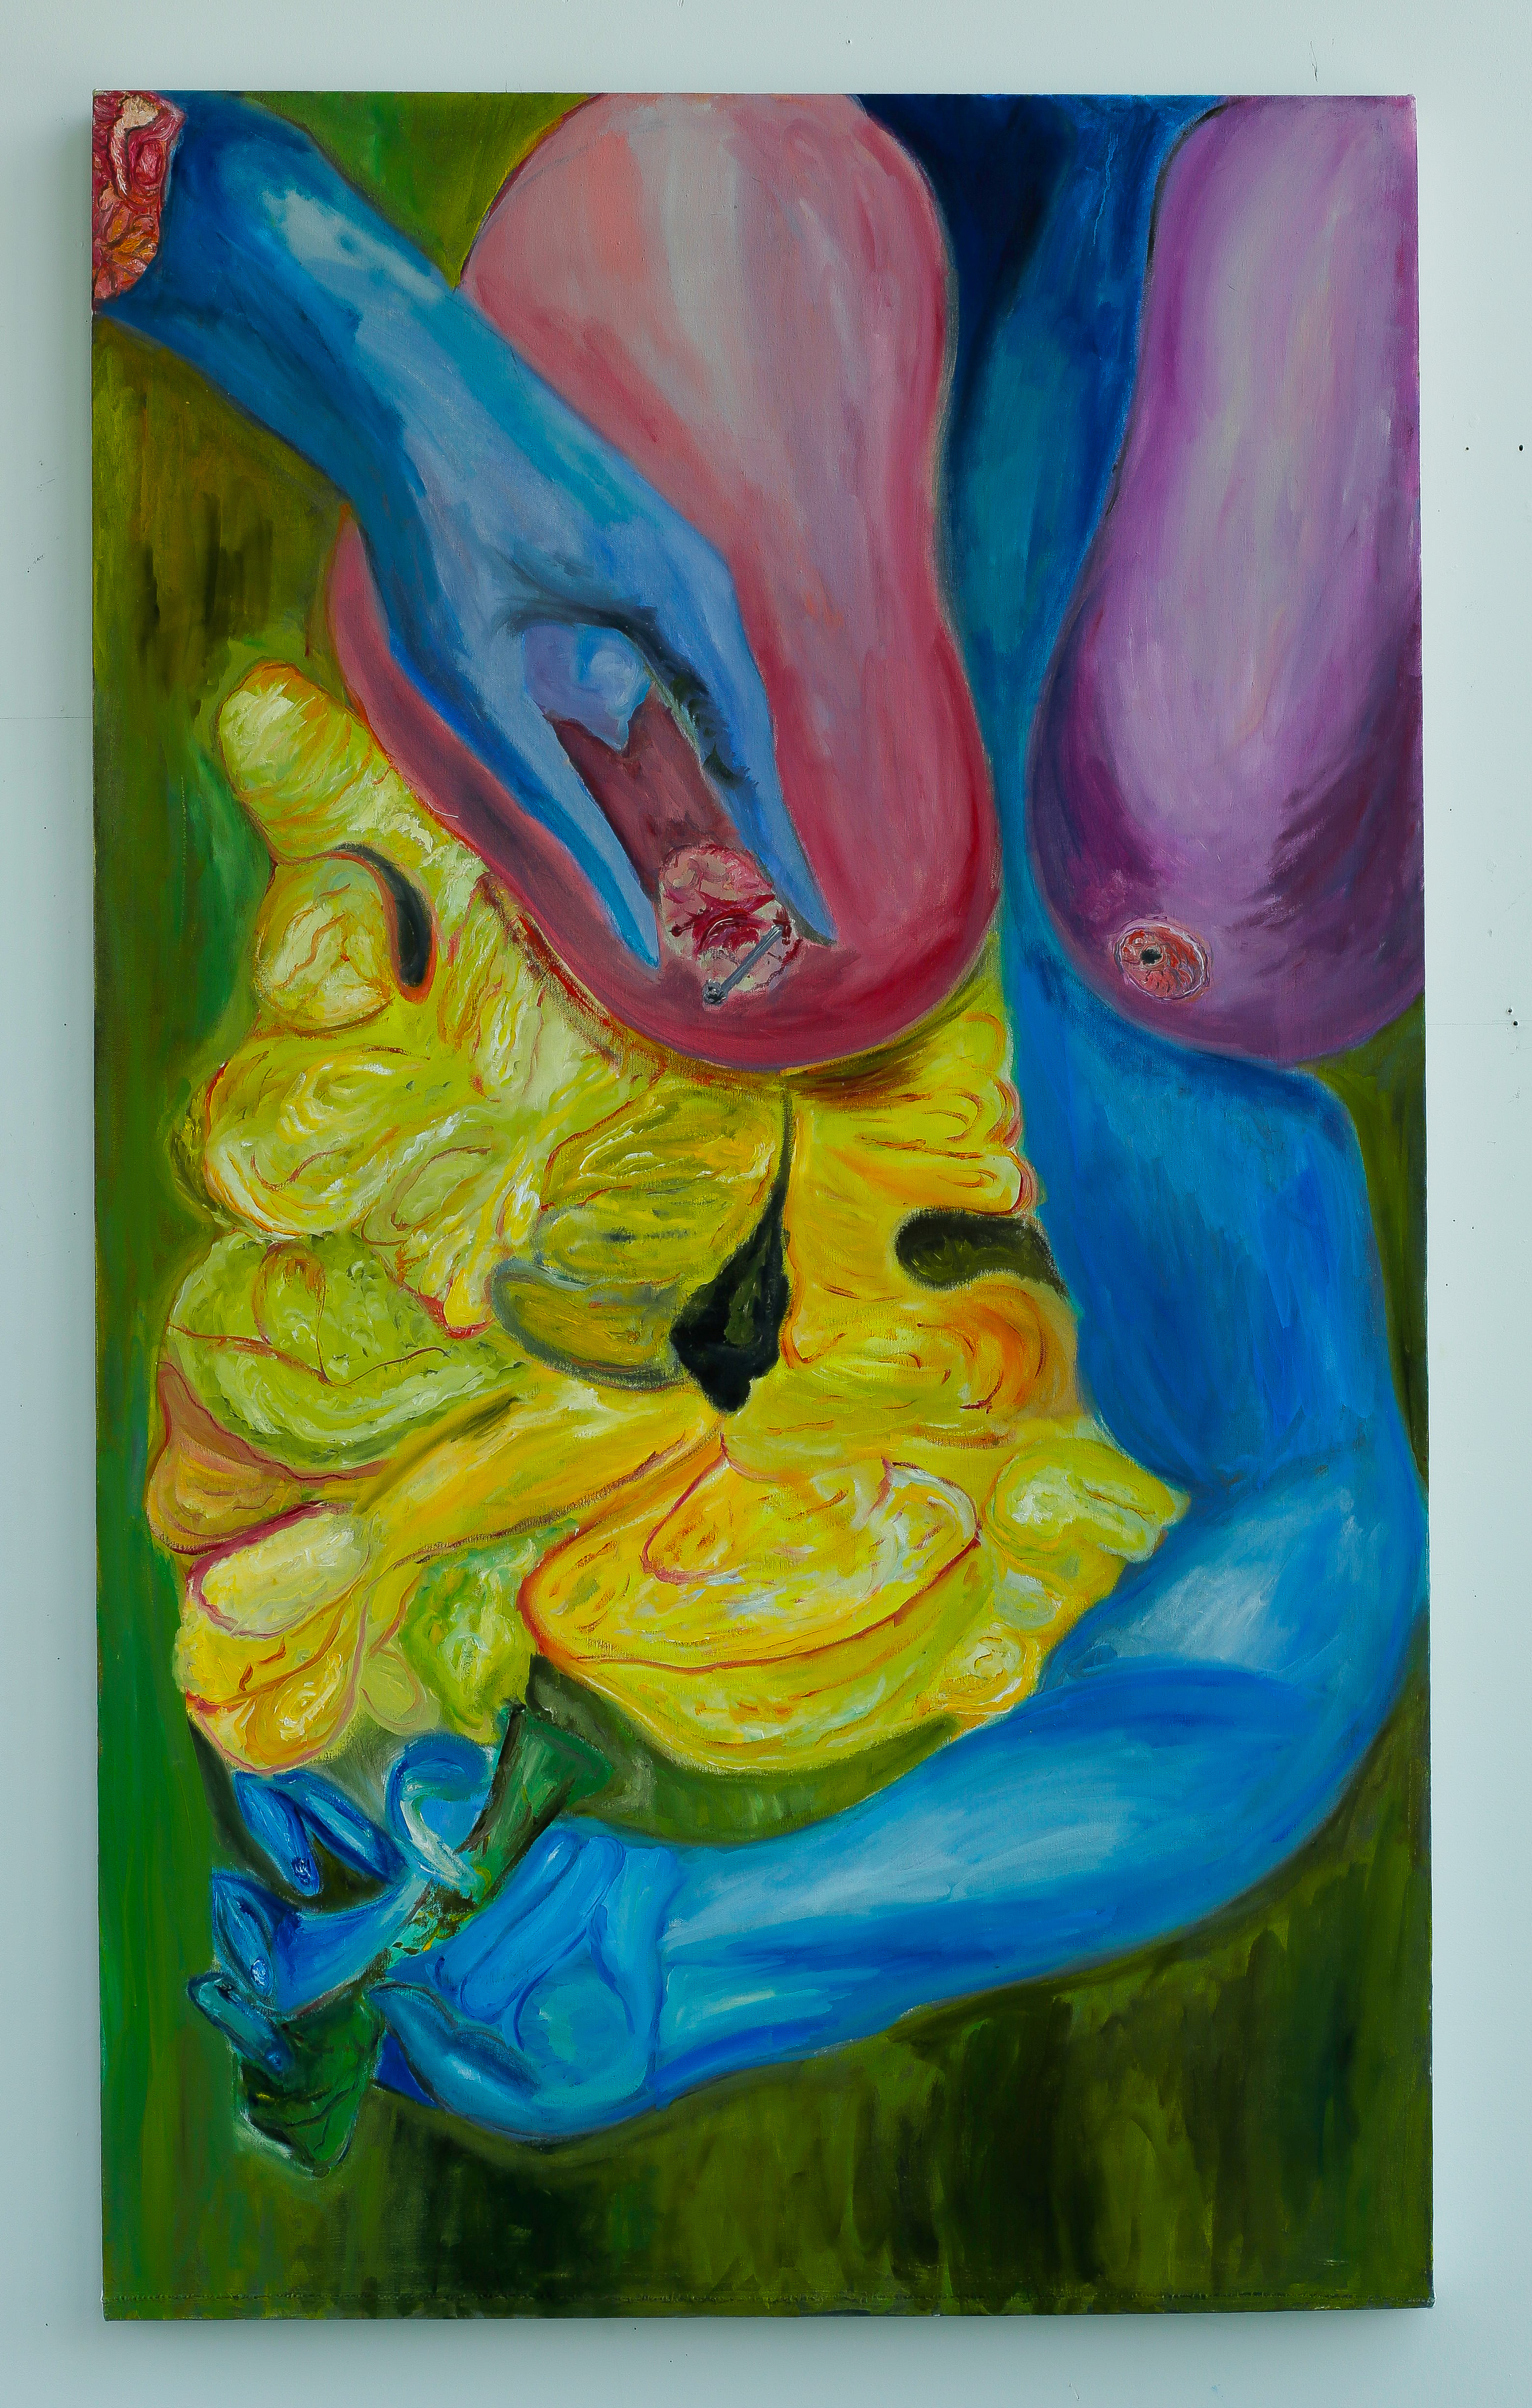 <i>Ripped Away</i><br>Oil on canvas, 18 x 24 in, 2021.